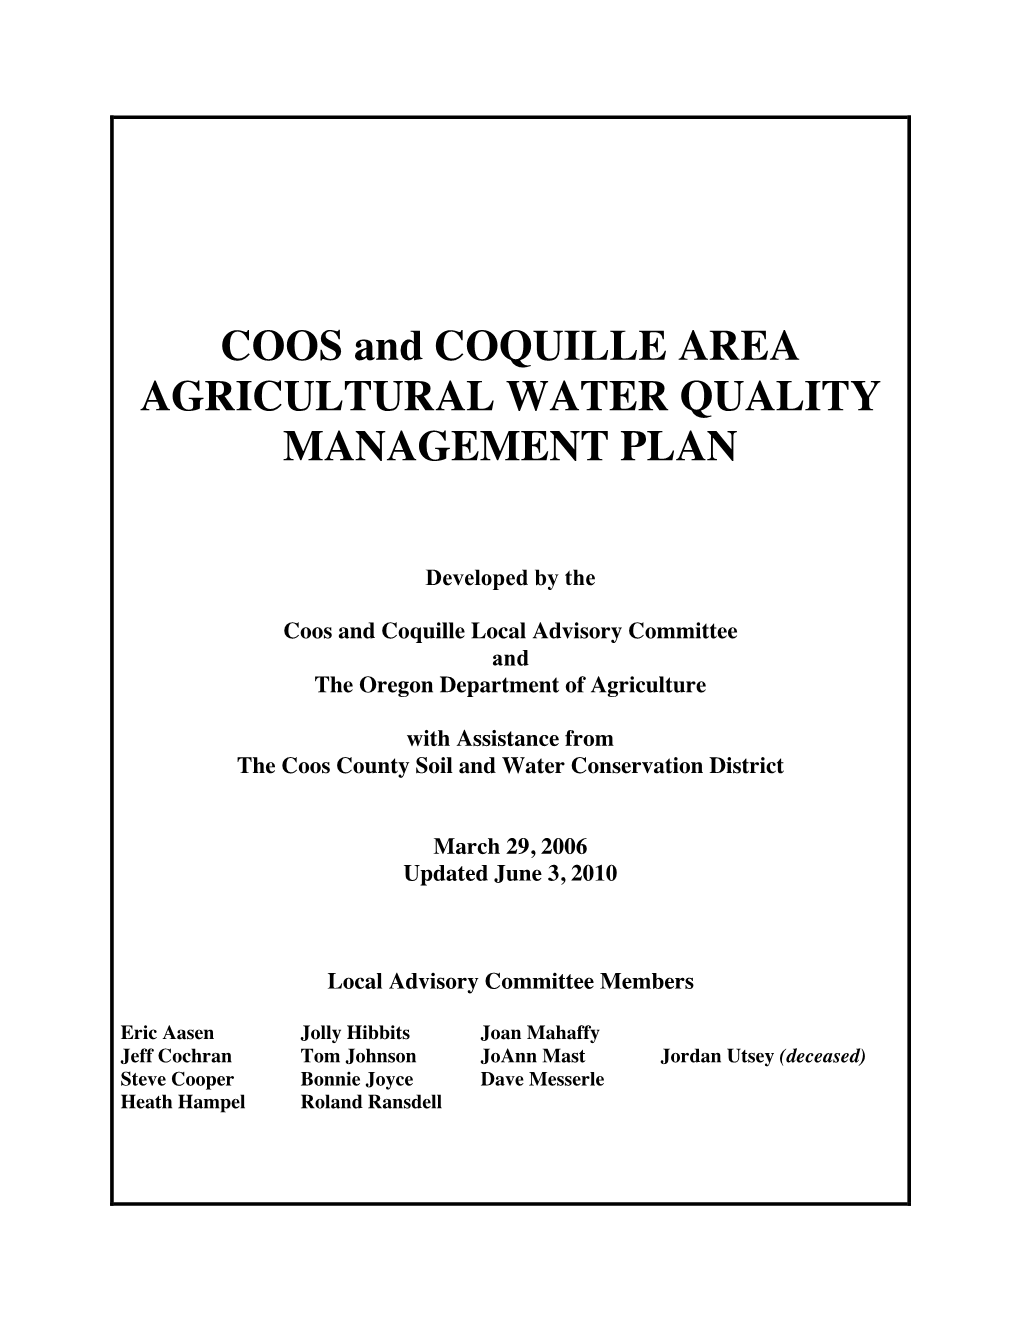 COOS and COQUILLE AREA AGRICULTURAL WATER QUALITY MANAGEMENT PLAN